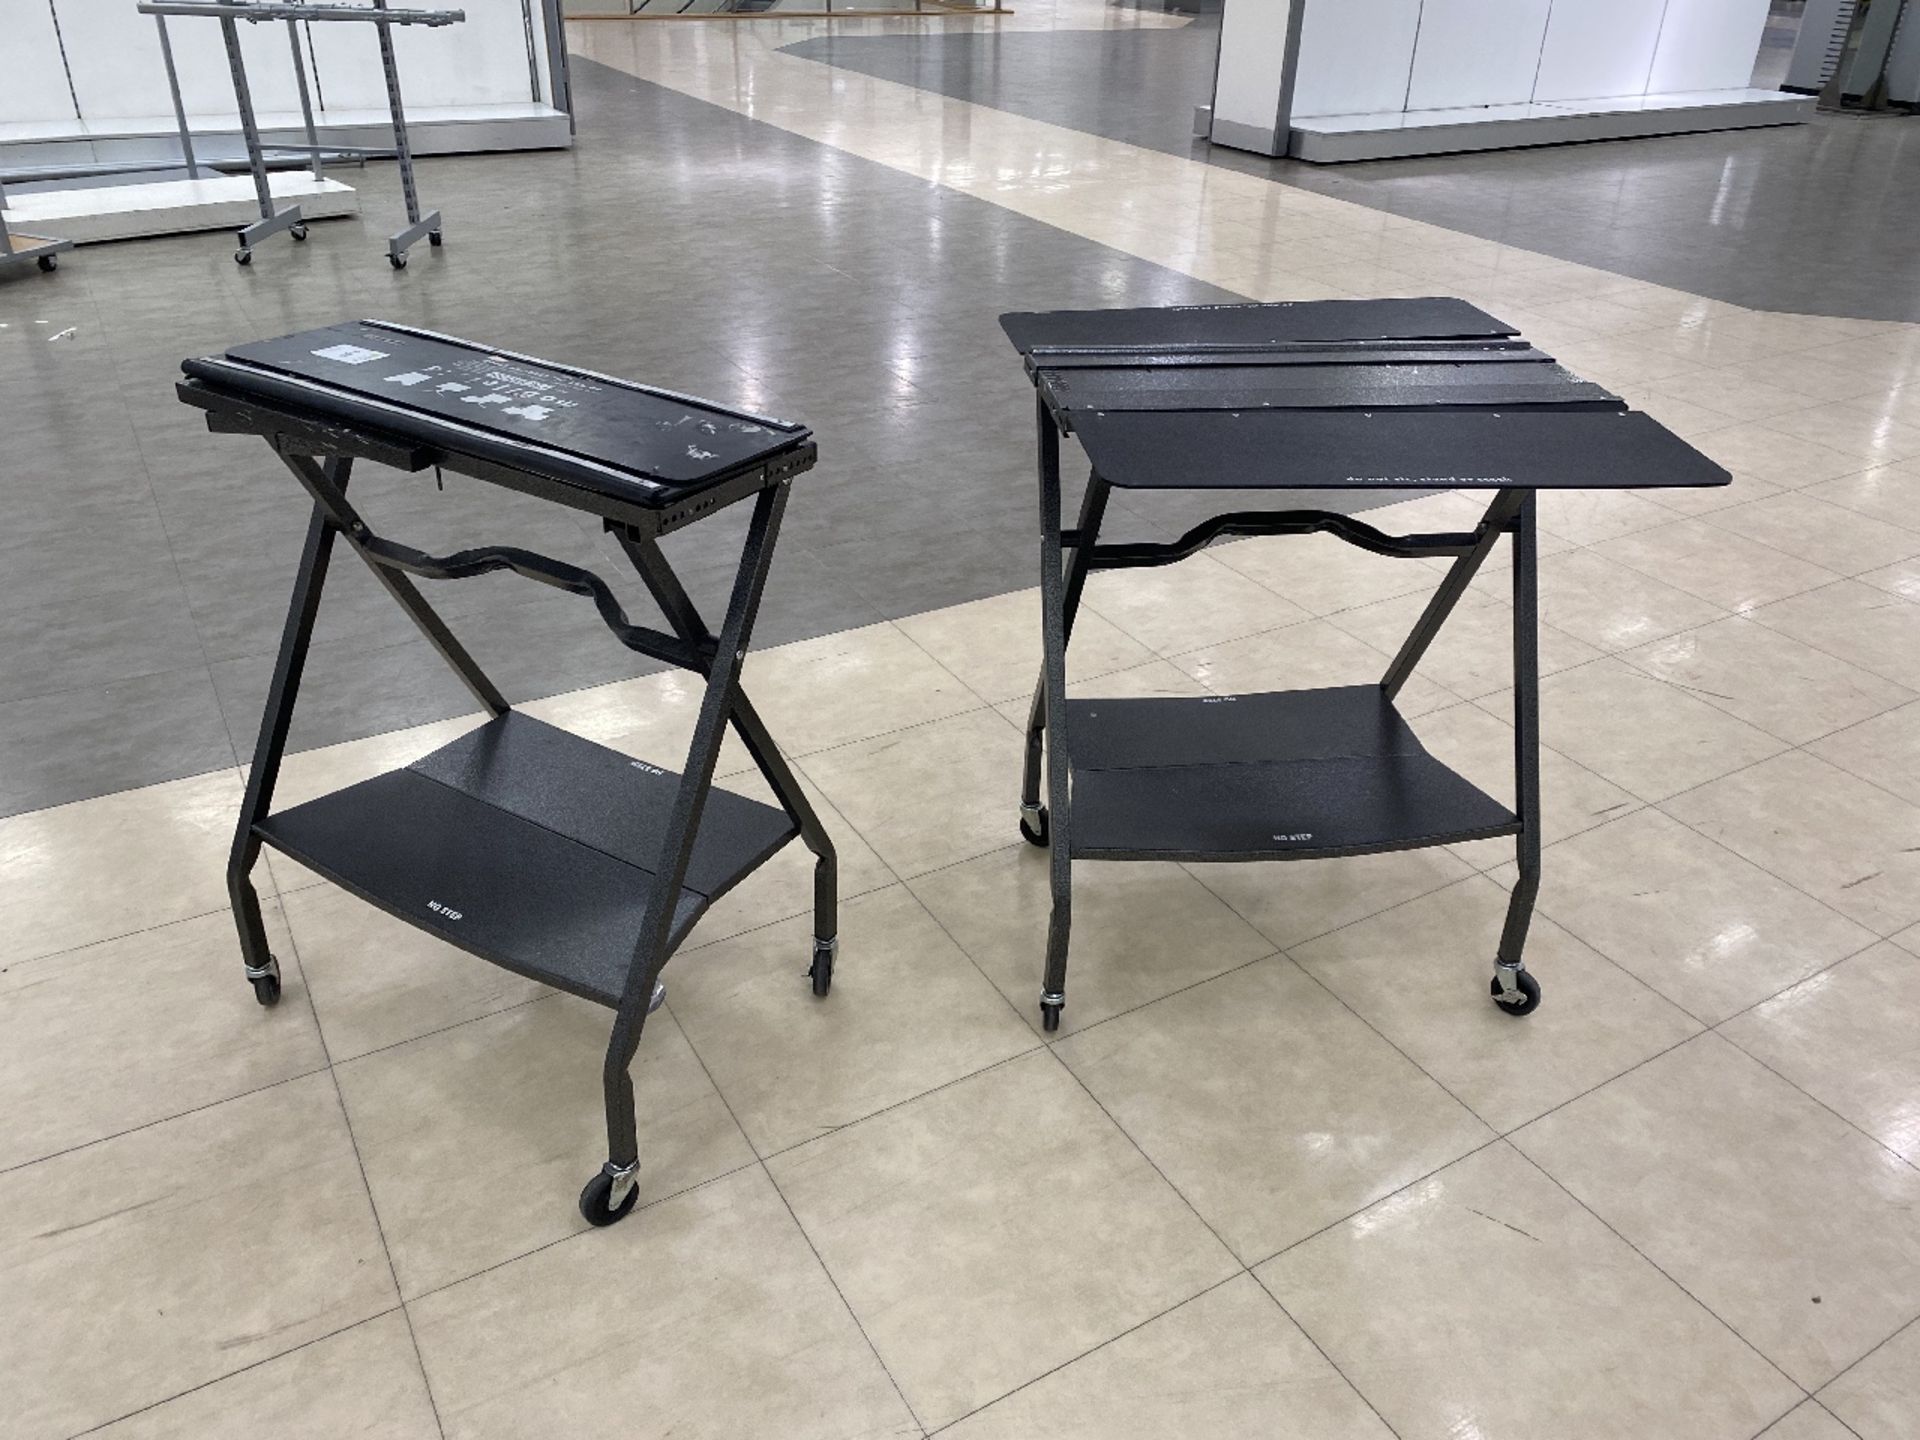 2 x compress mobile folding tables - Image 3 of 4